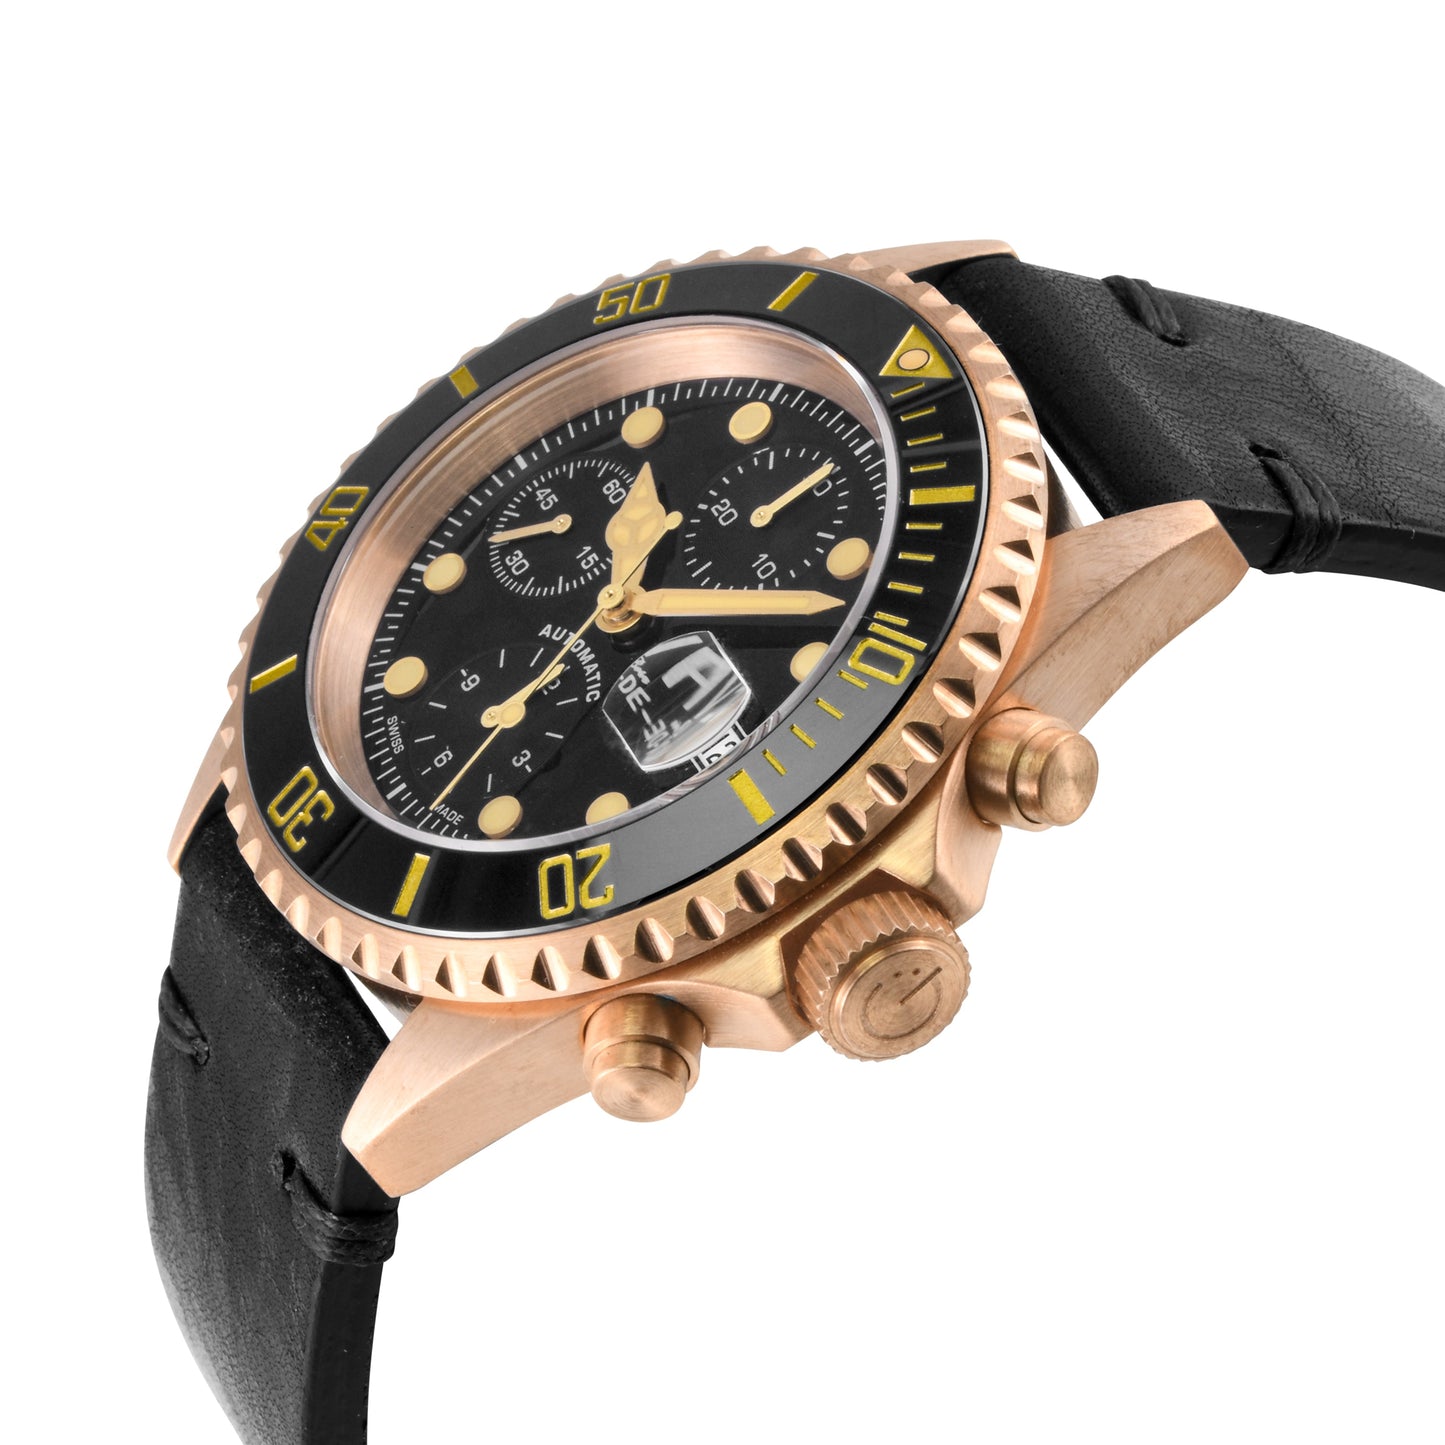 Gevril-Luxury-Swiss-Watches-Gevril Wall Street Bronze - Chronograph-4167